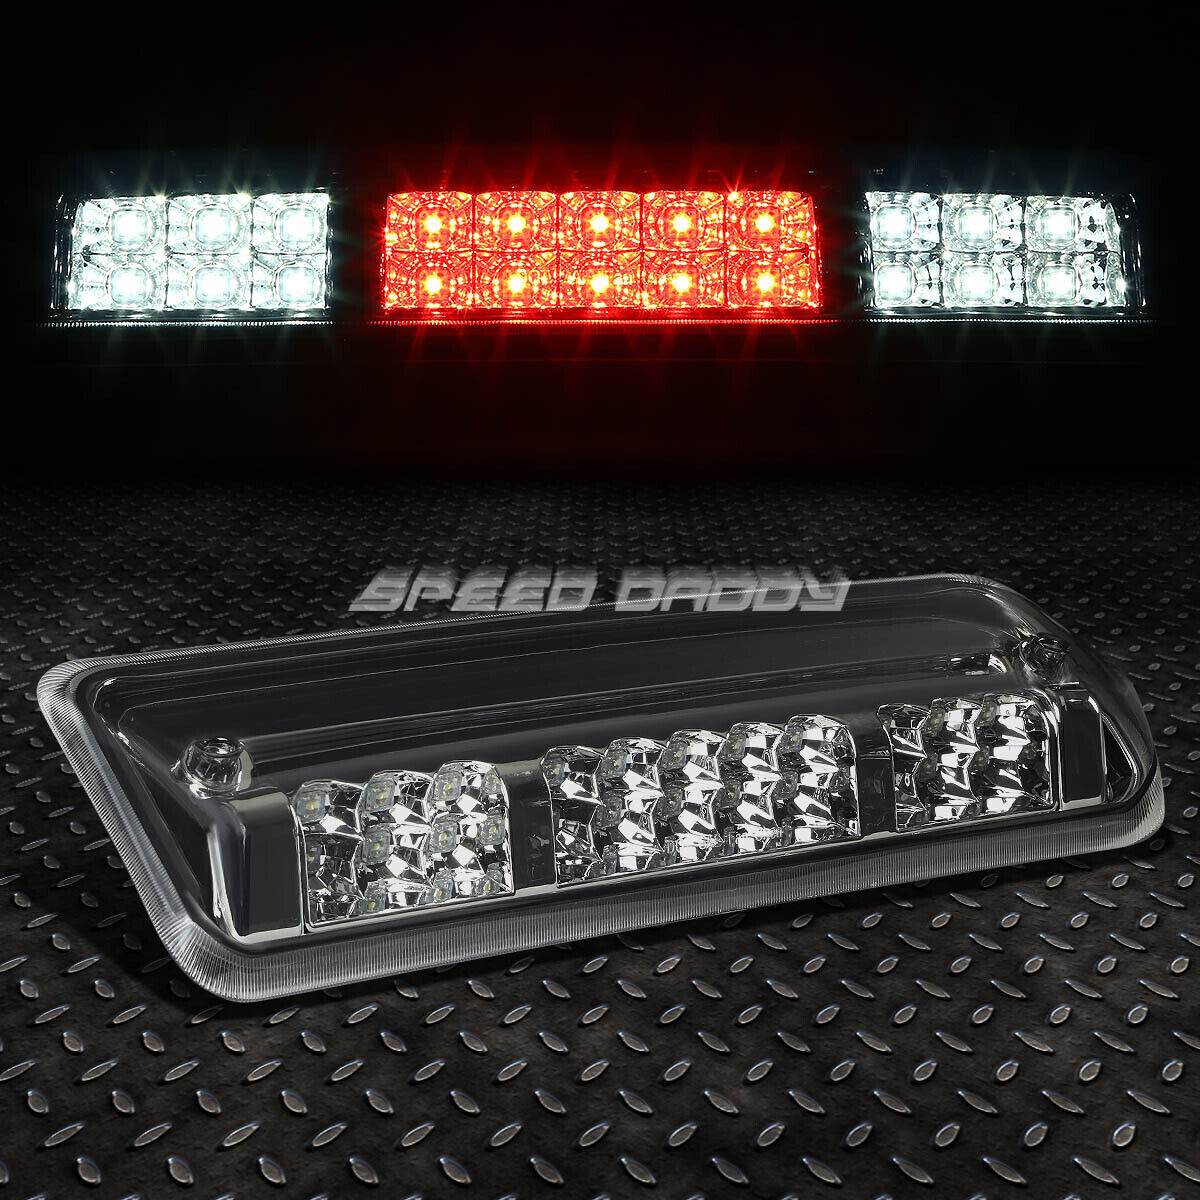 [2-ROW LED]FOR 04-08 F150 MARK LT THIRD 3RD TAIL BRAKE LIGHT CARGO LAMP SMOKED